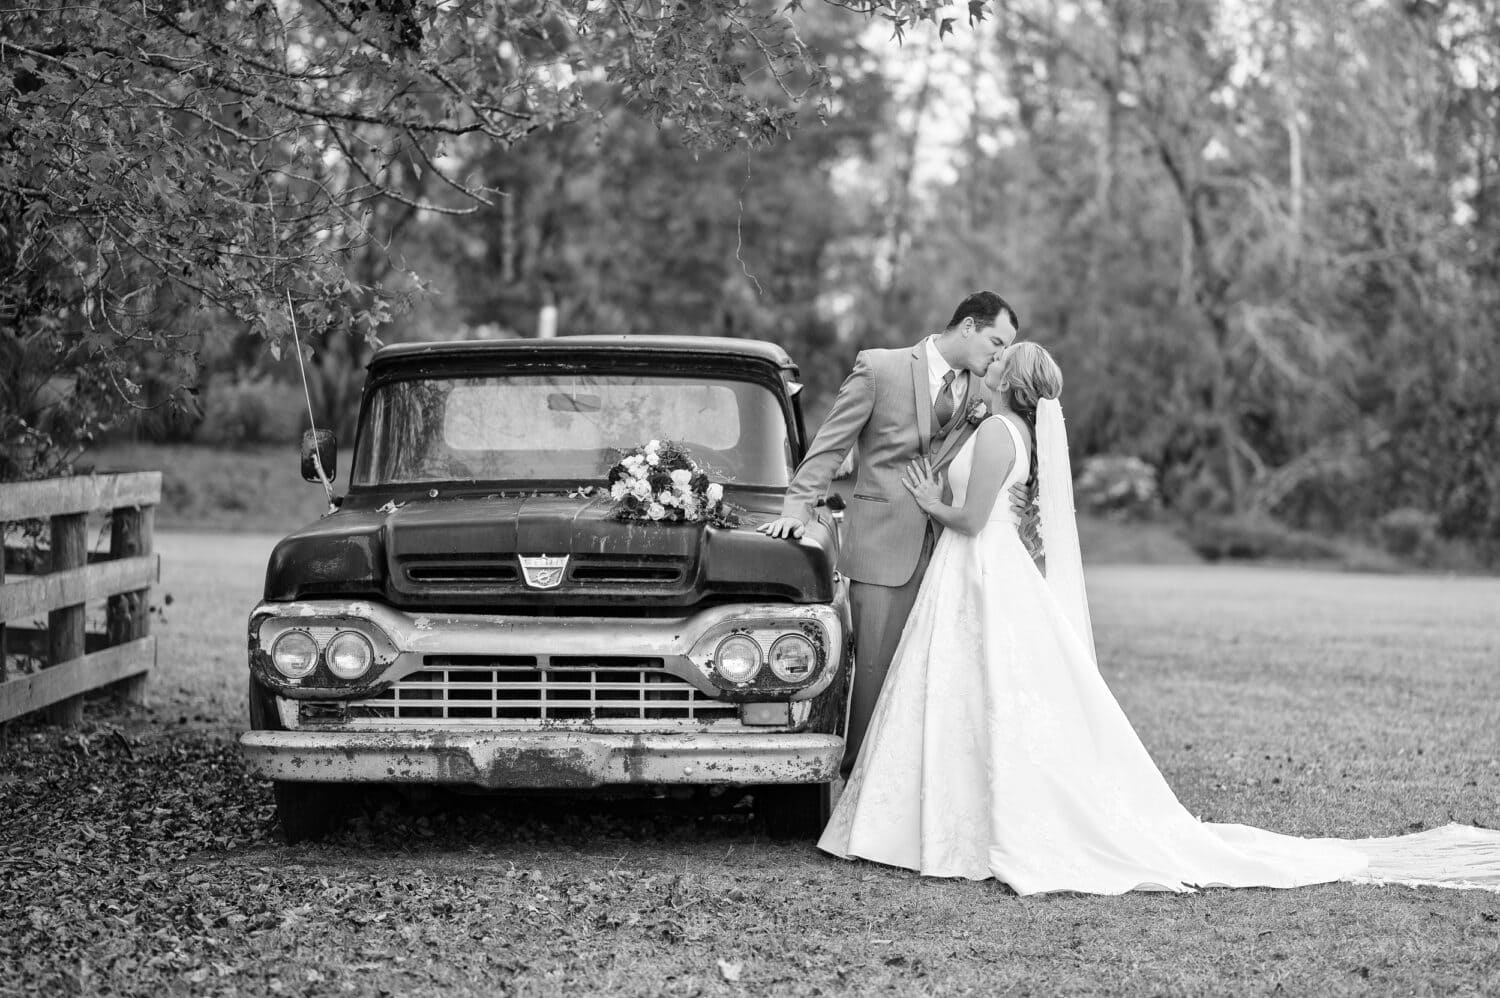 Portraits of the bride and groom around the vintage truck in black and white - The Blessed Barn